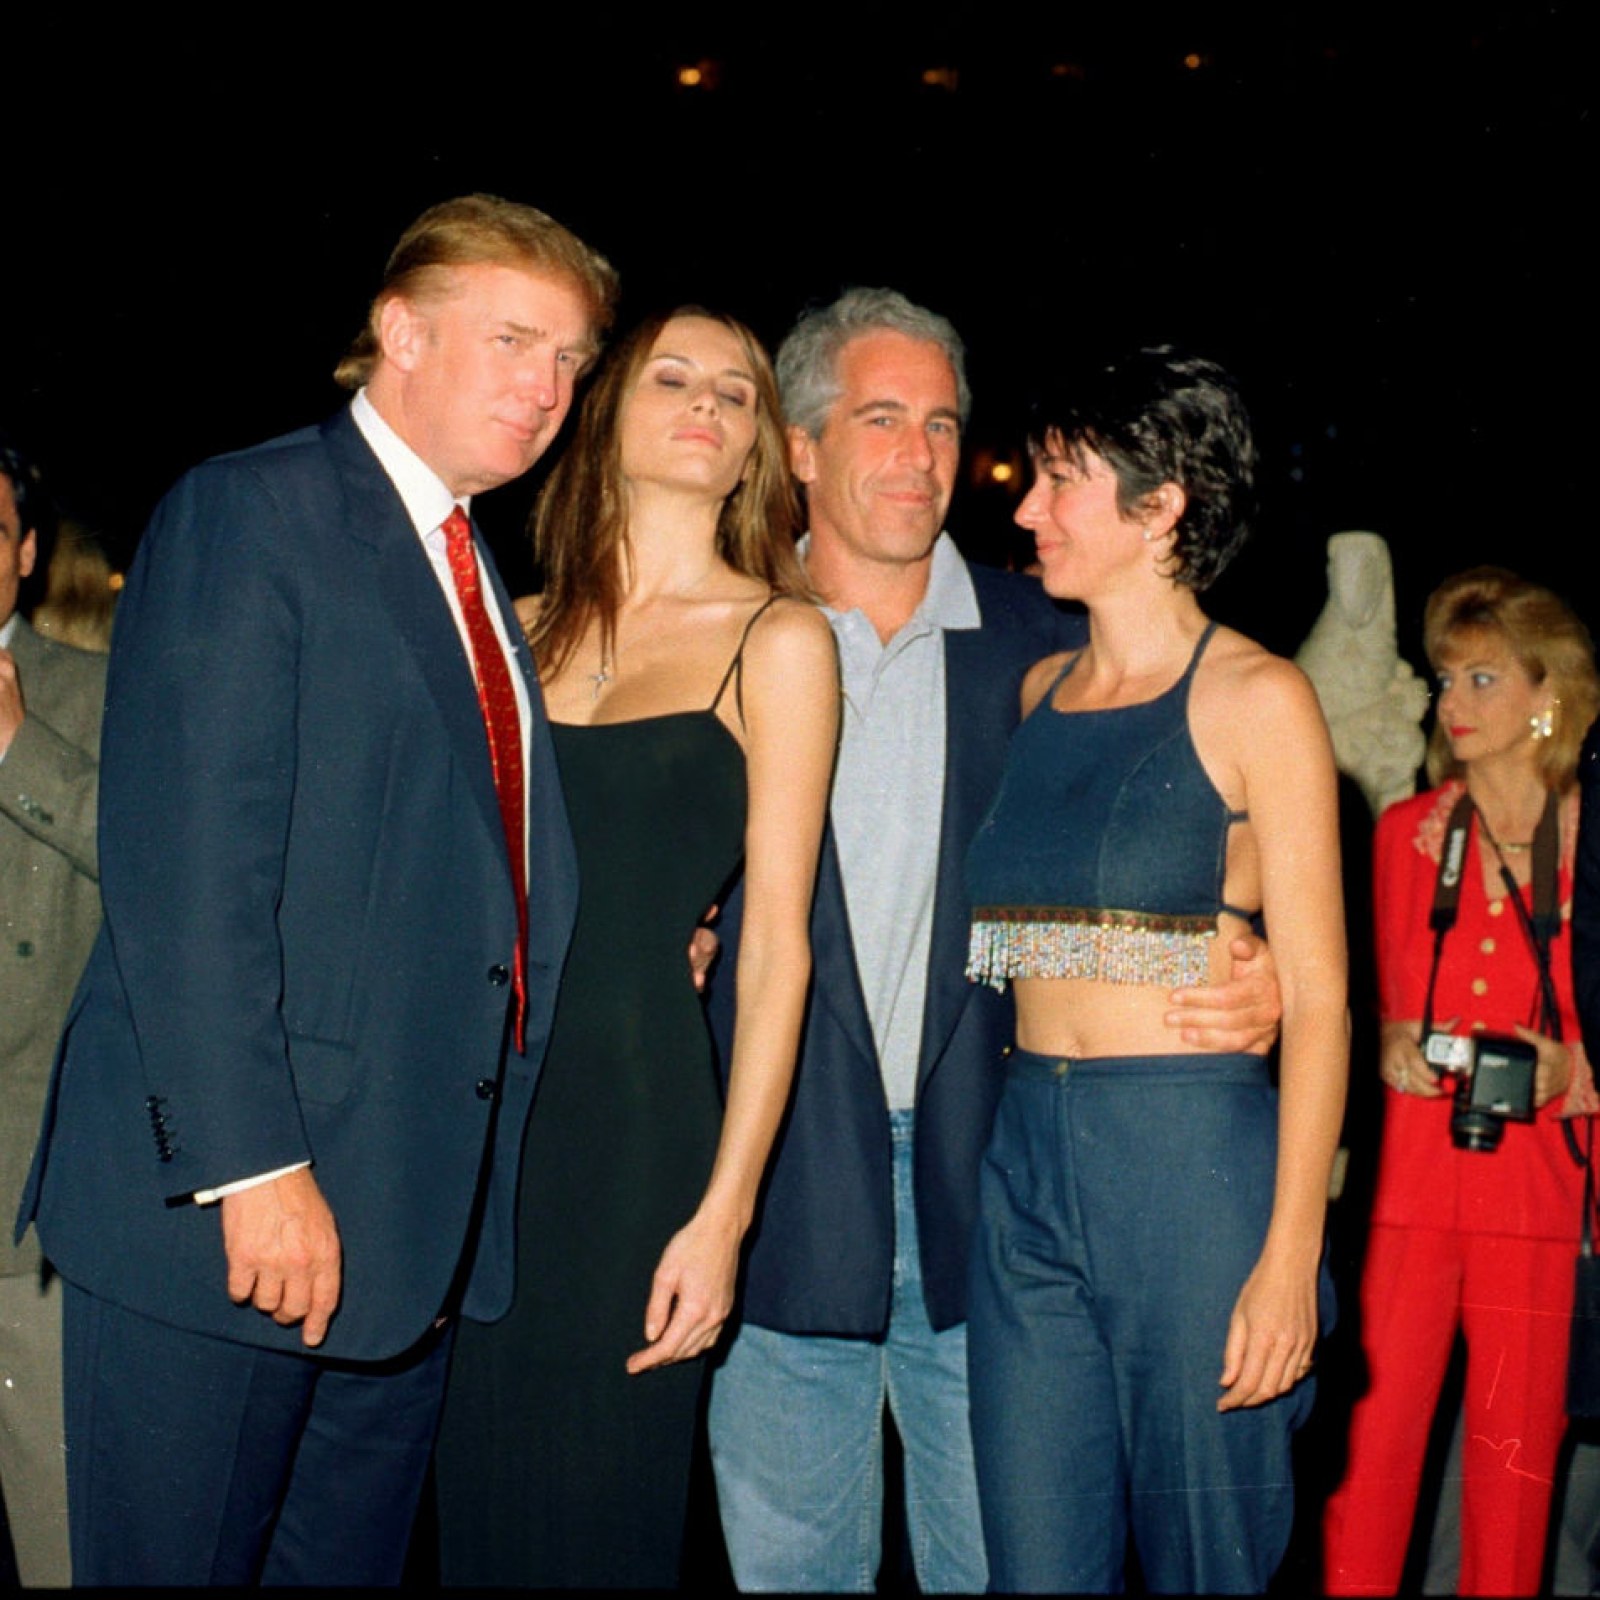 Old Man Fuck Young Girl - What Is The Lolita Express? Epstein's Infamous Sex Plane ...